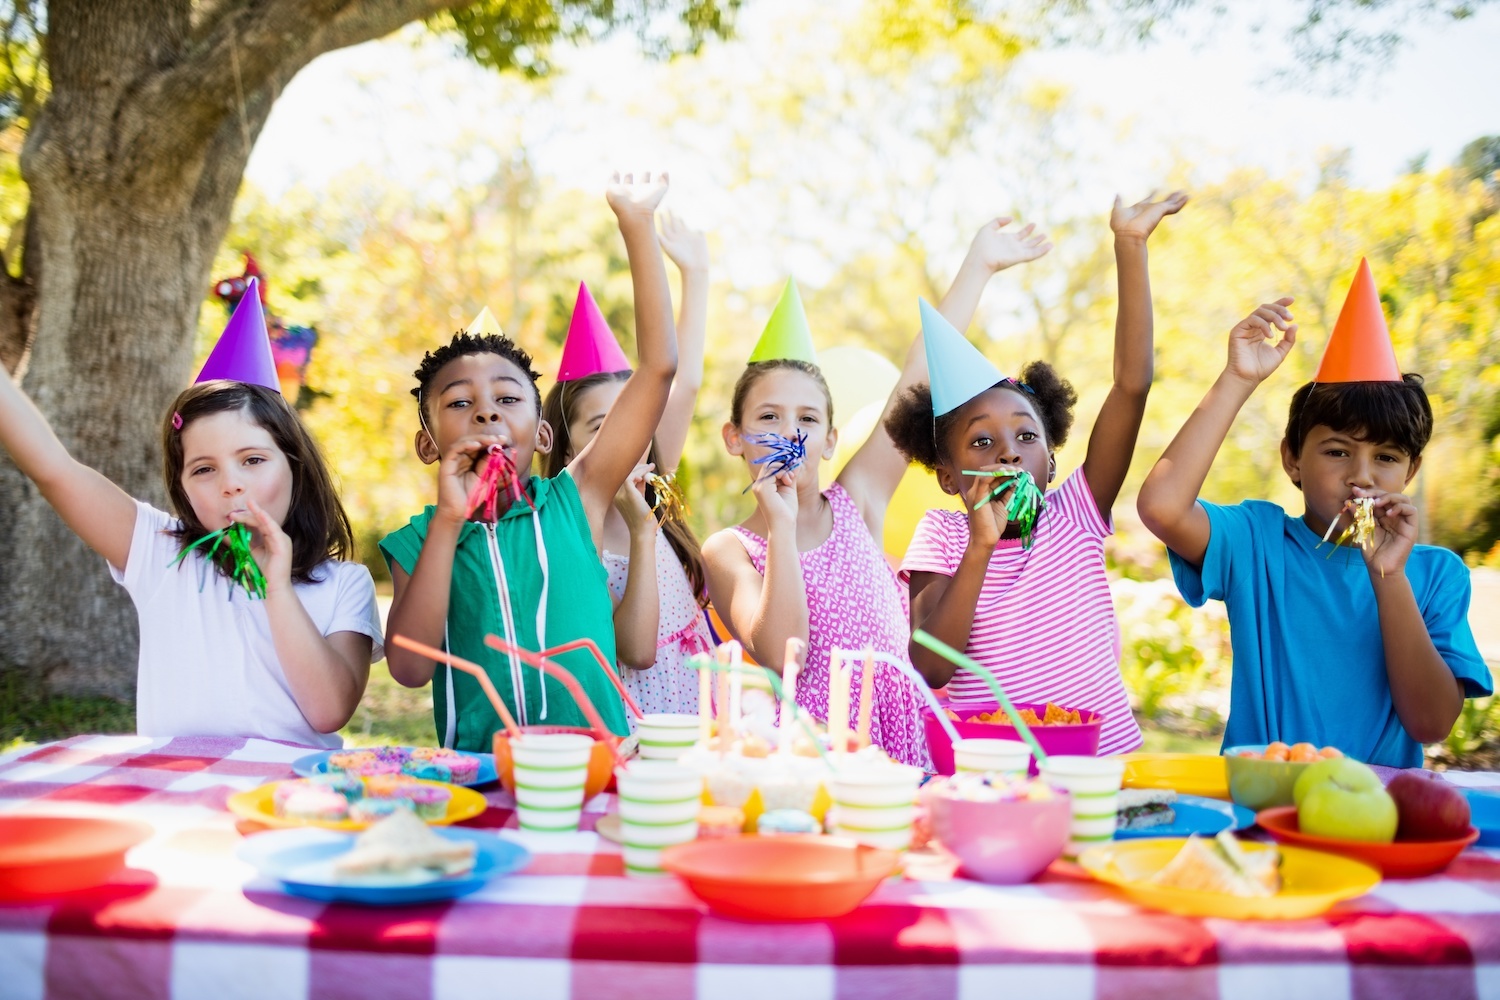 birthday party games